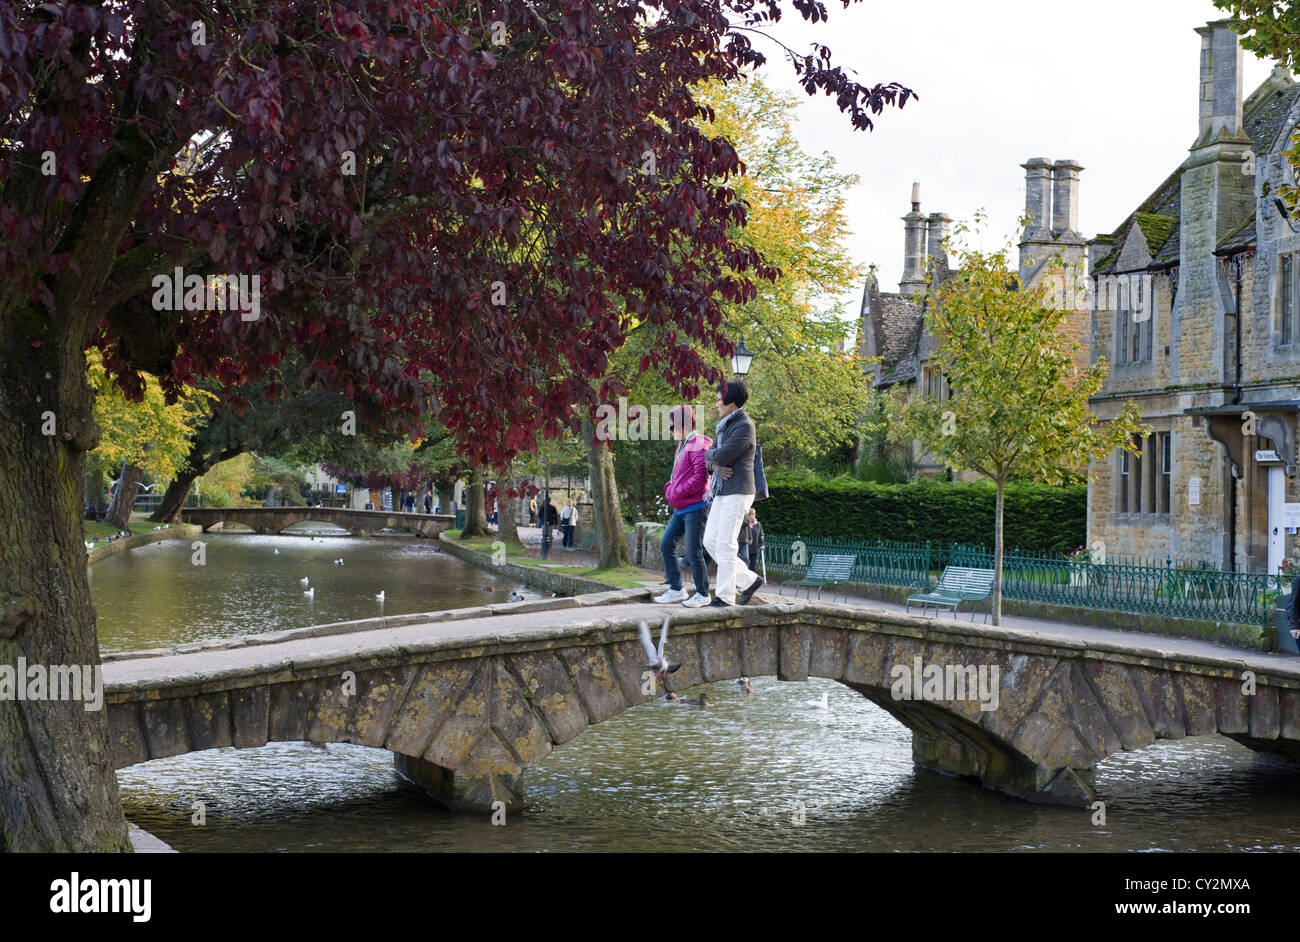 Cotswold village of Bourton-on-the-water with  tourists crossing the bridge over the river Windrush, Gloucestershire, England Stock Photo